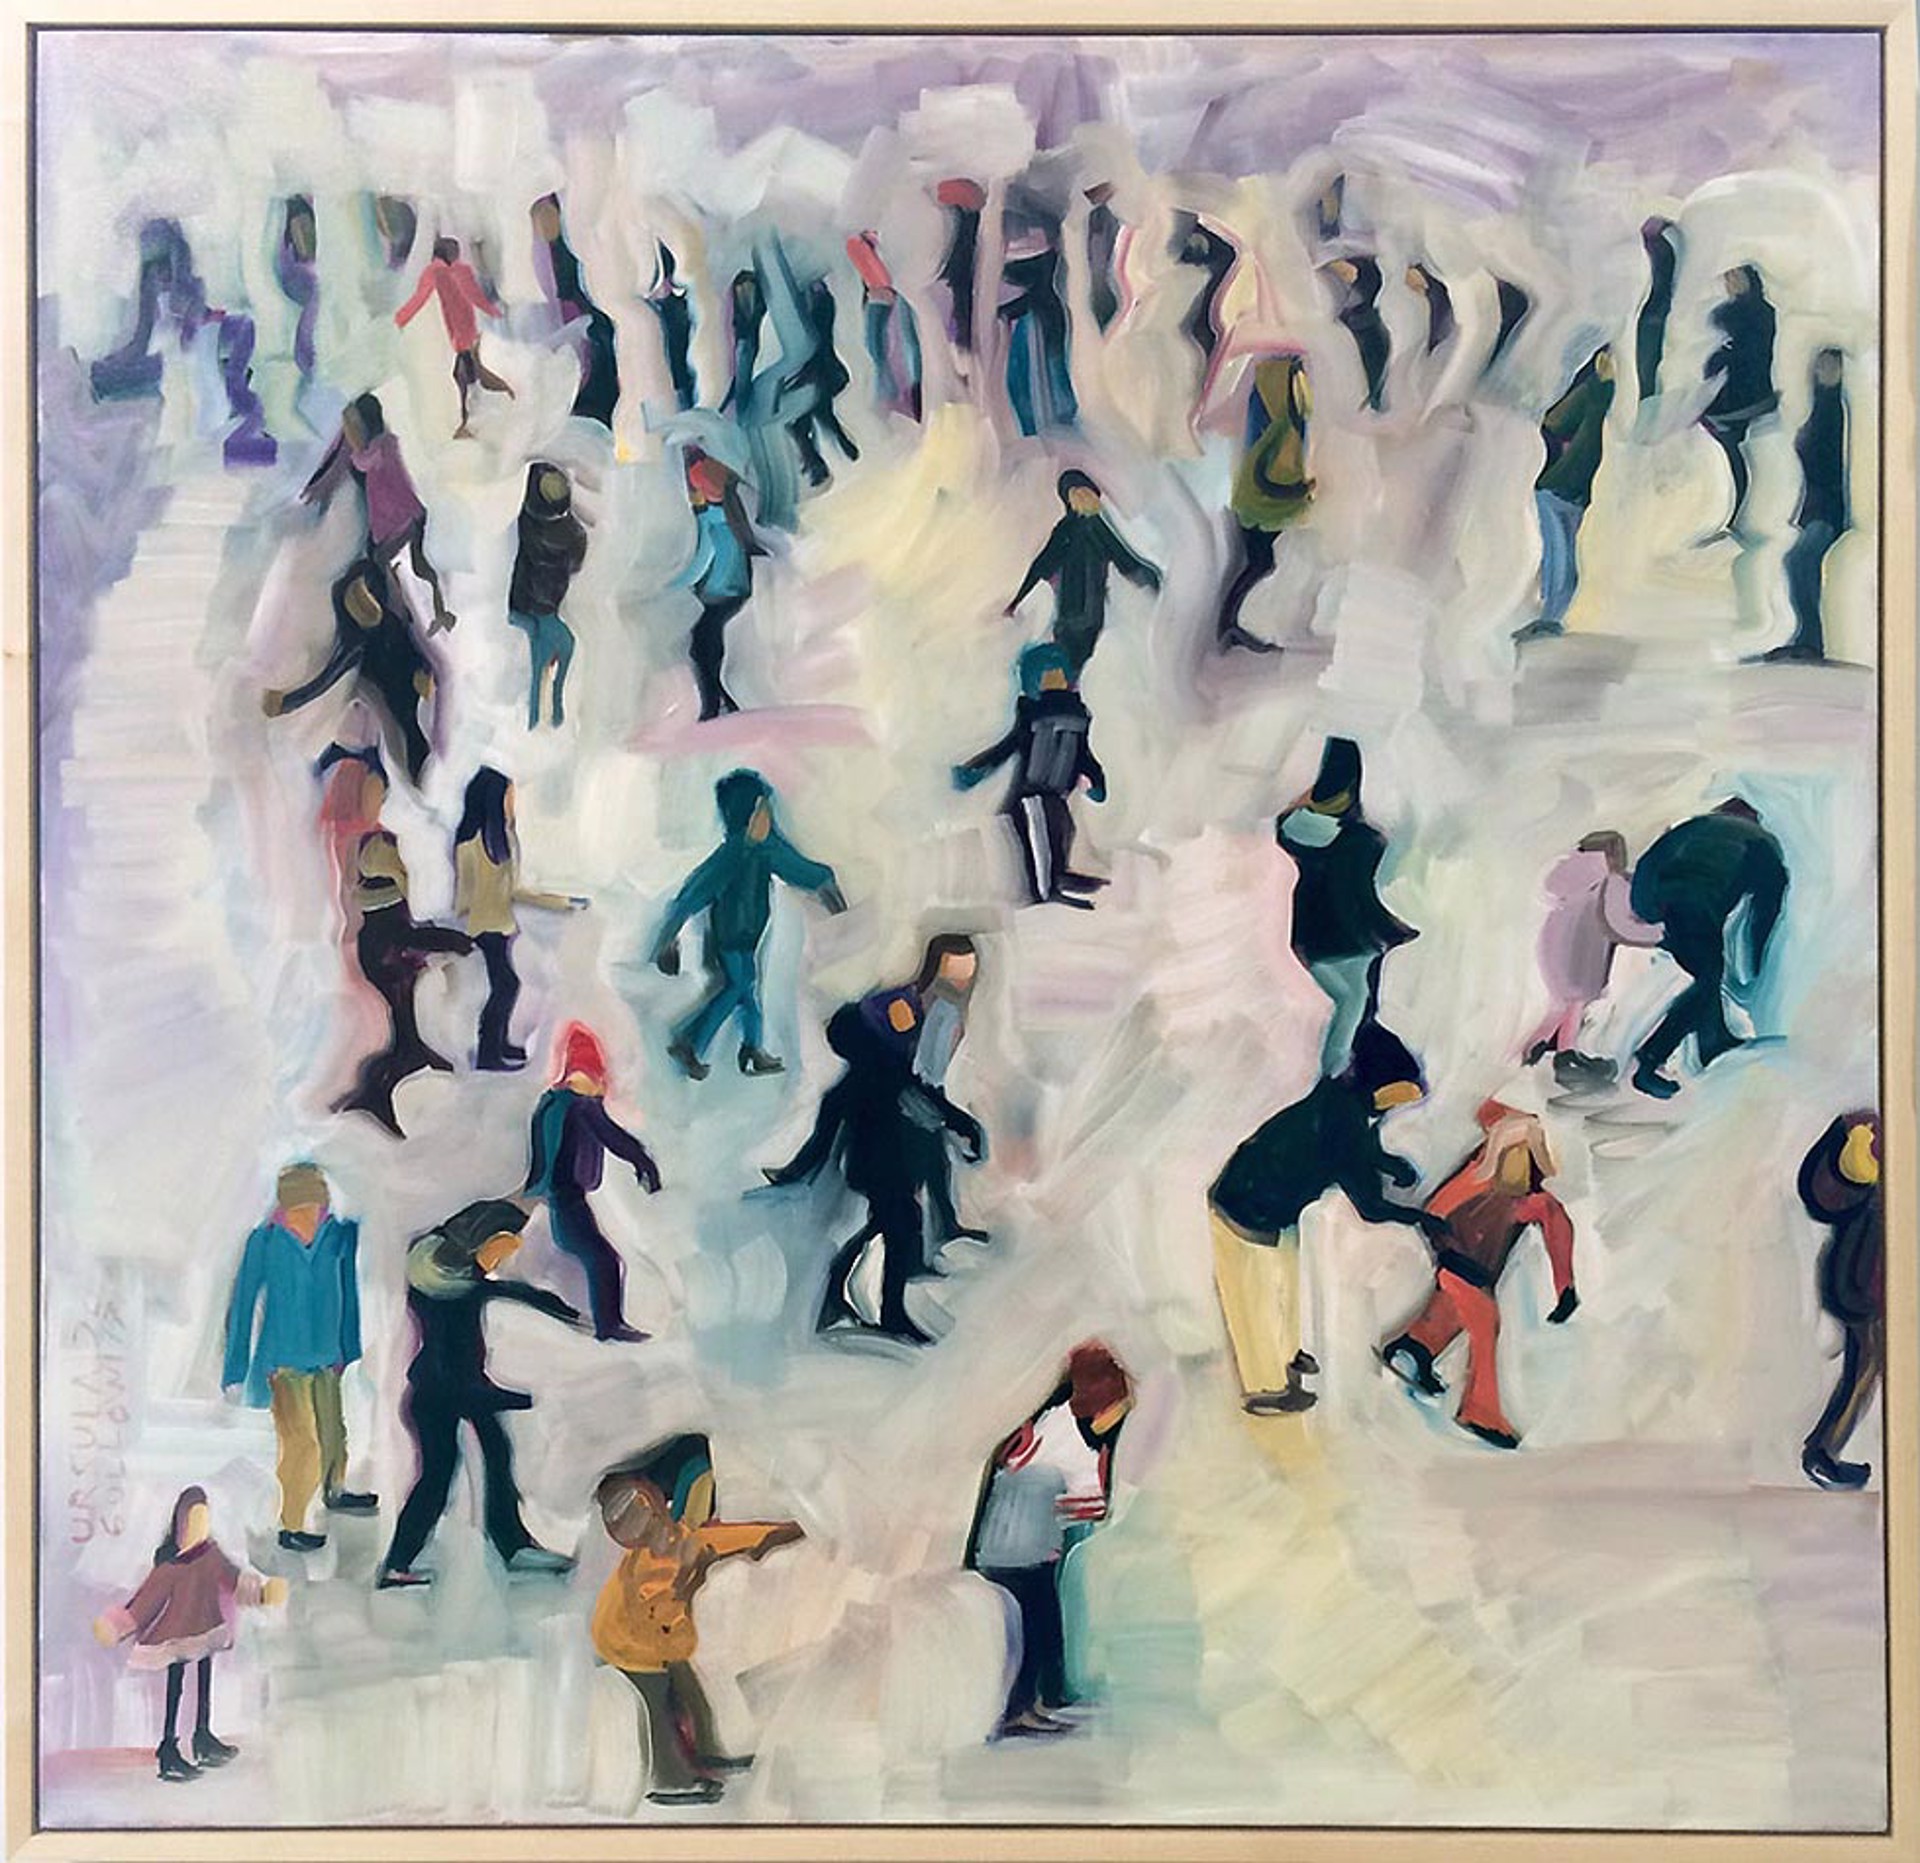 Ice Rink by Ursula Gullow